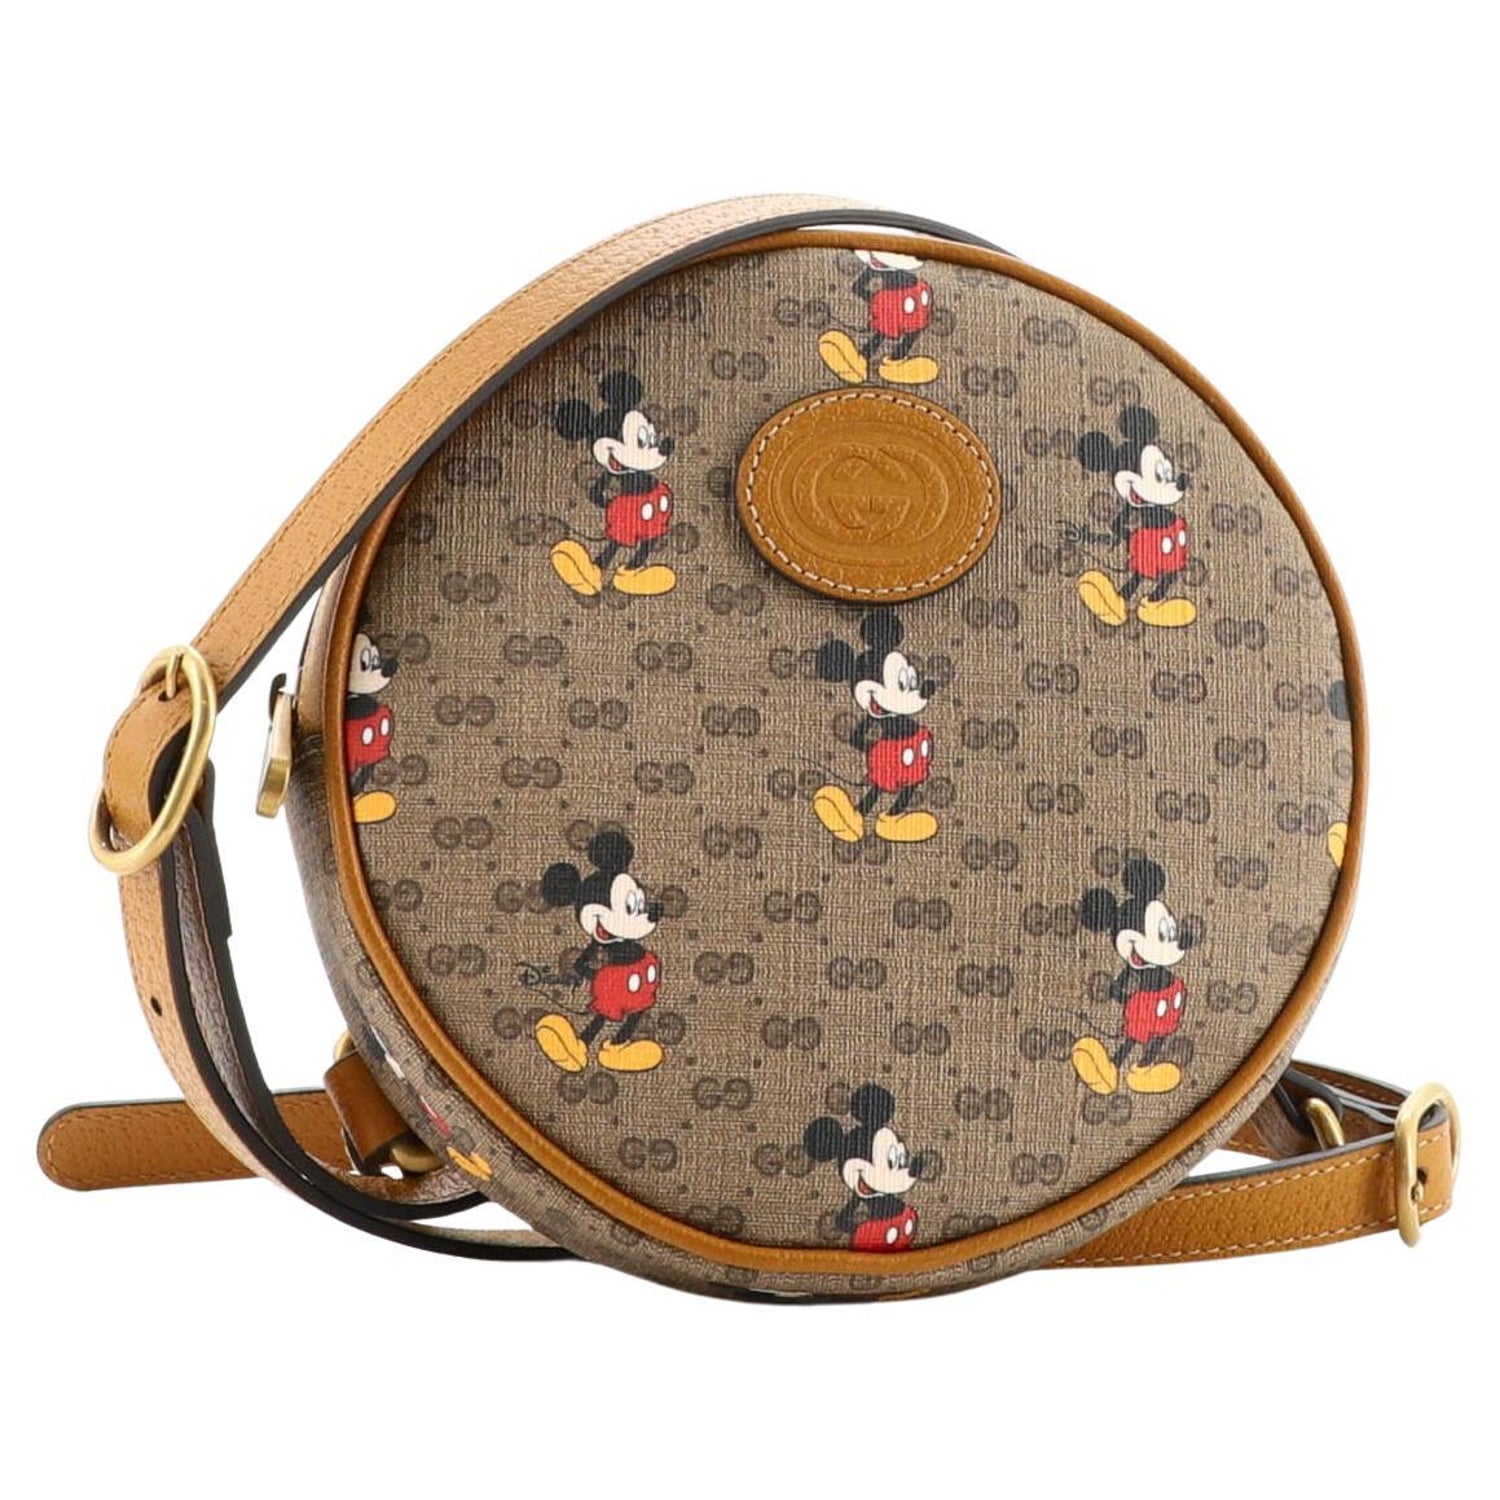 Gucci x Disney Backpack Mini GG Supreme Mickey Mouse Medium Beige in Coated  Canvas/Leather with Antique Gold-tone - US